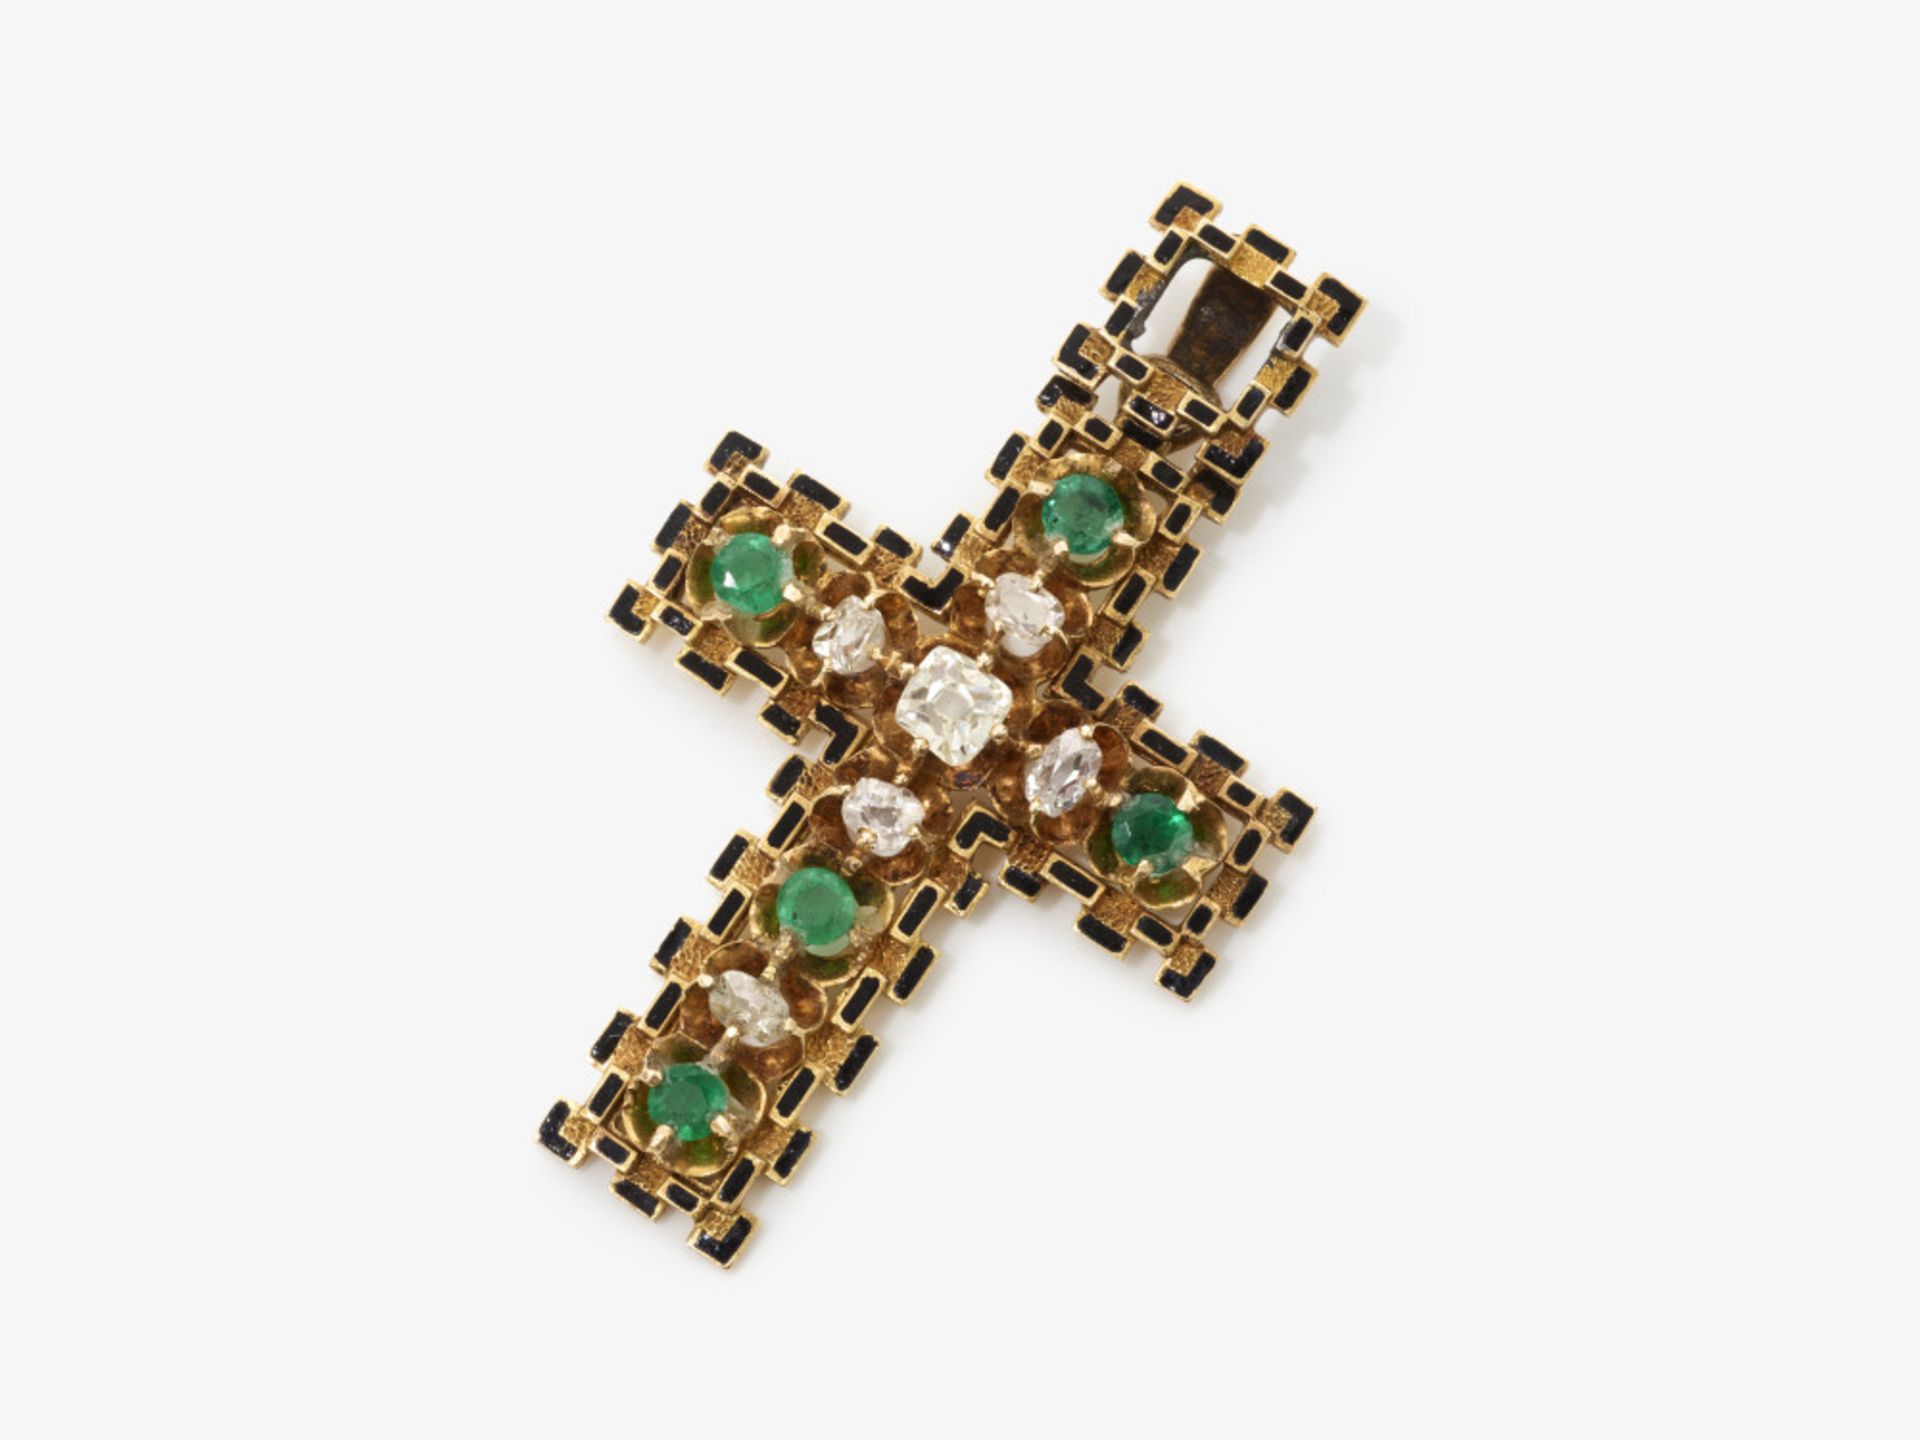 A cross pendant decorated with emeralds and old-cut diamonds - Italy, 1900s - 1910s